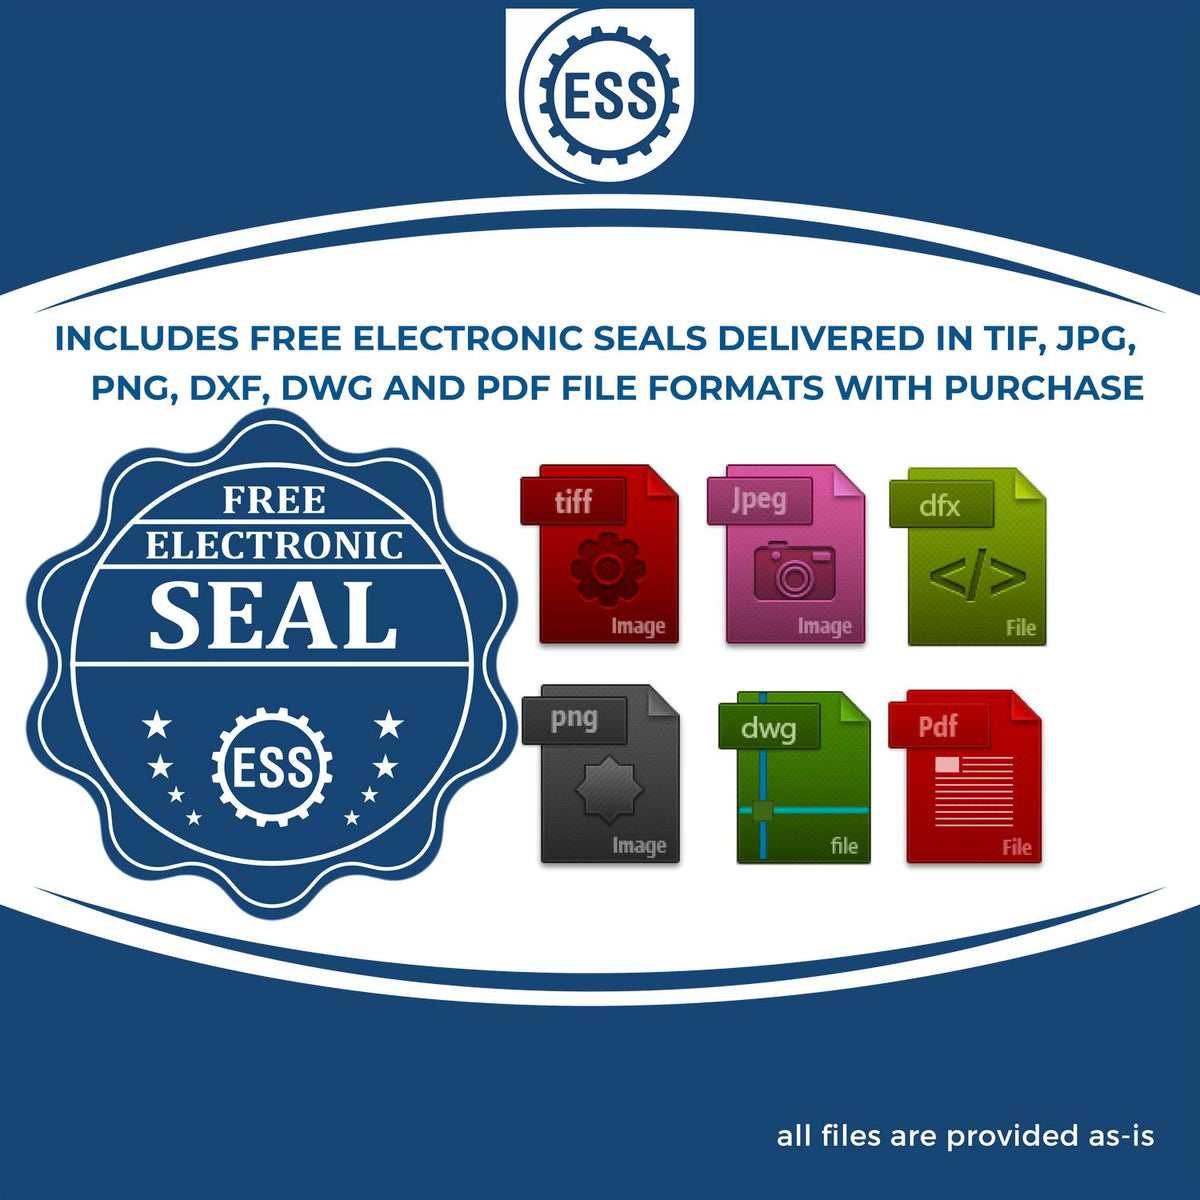 An infographic for the free electronic seal for the Gift Rhode Island Land Surveyor Seal illustrating the different file type icons such as DXF, DWG, TIF, JPG and PNG.